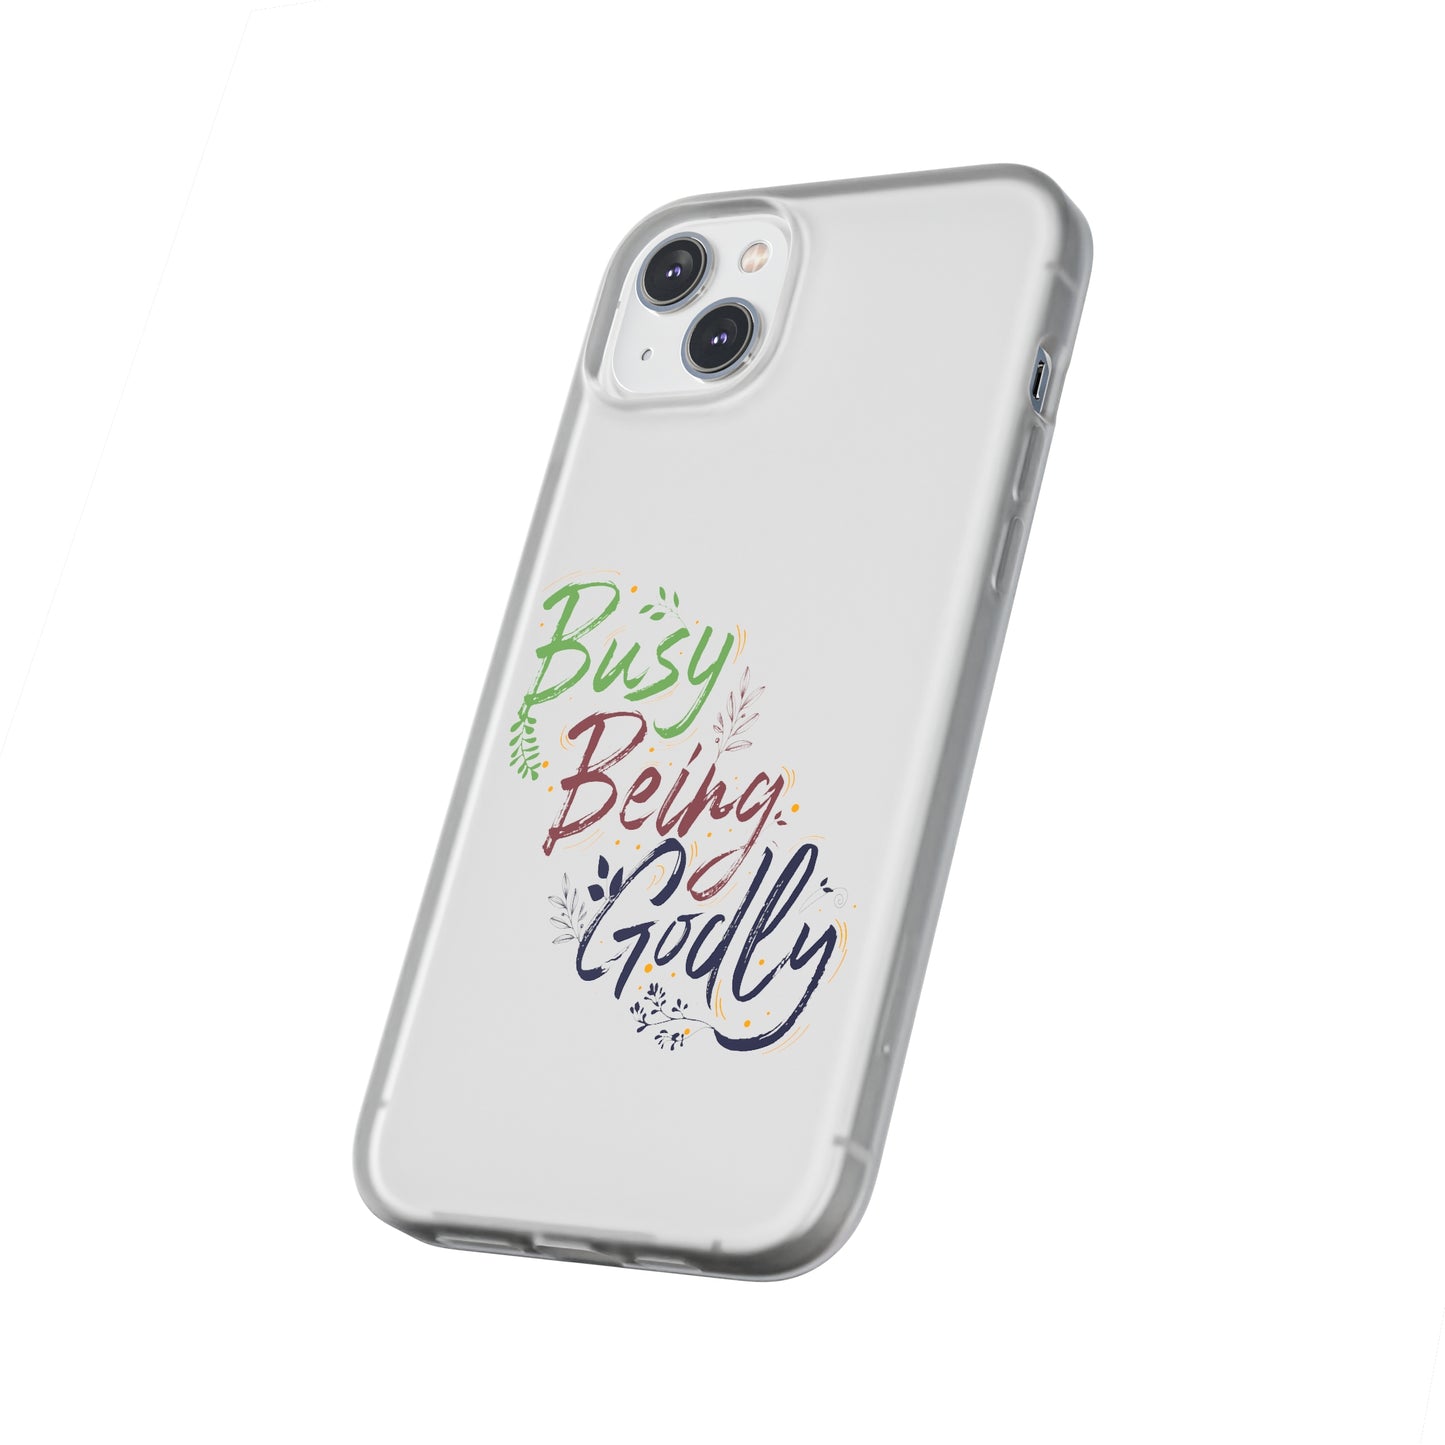 Busy Being Godly Flexi Phone Case